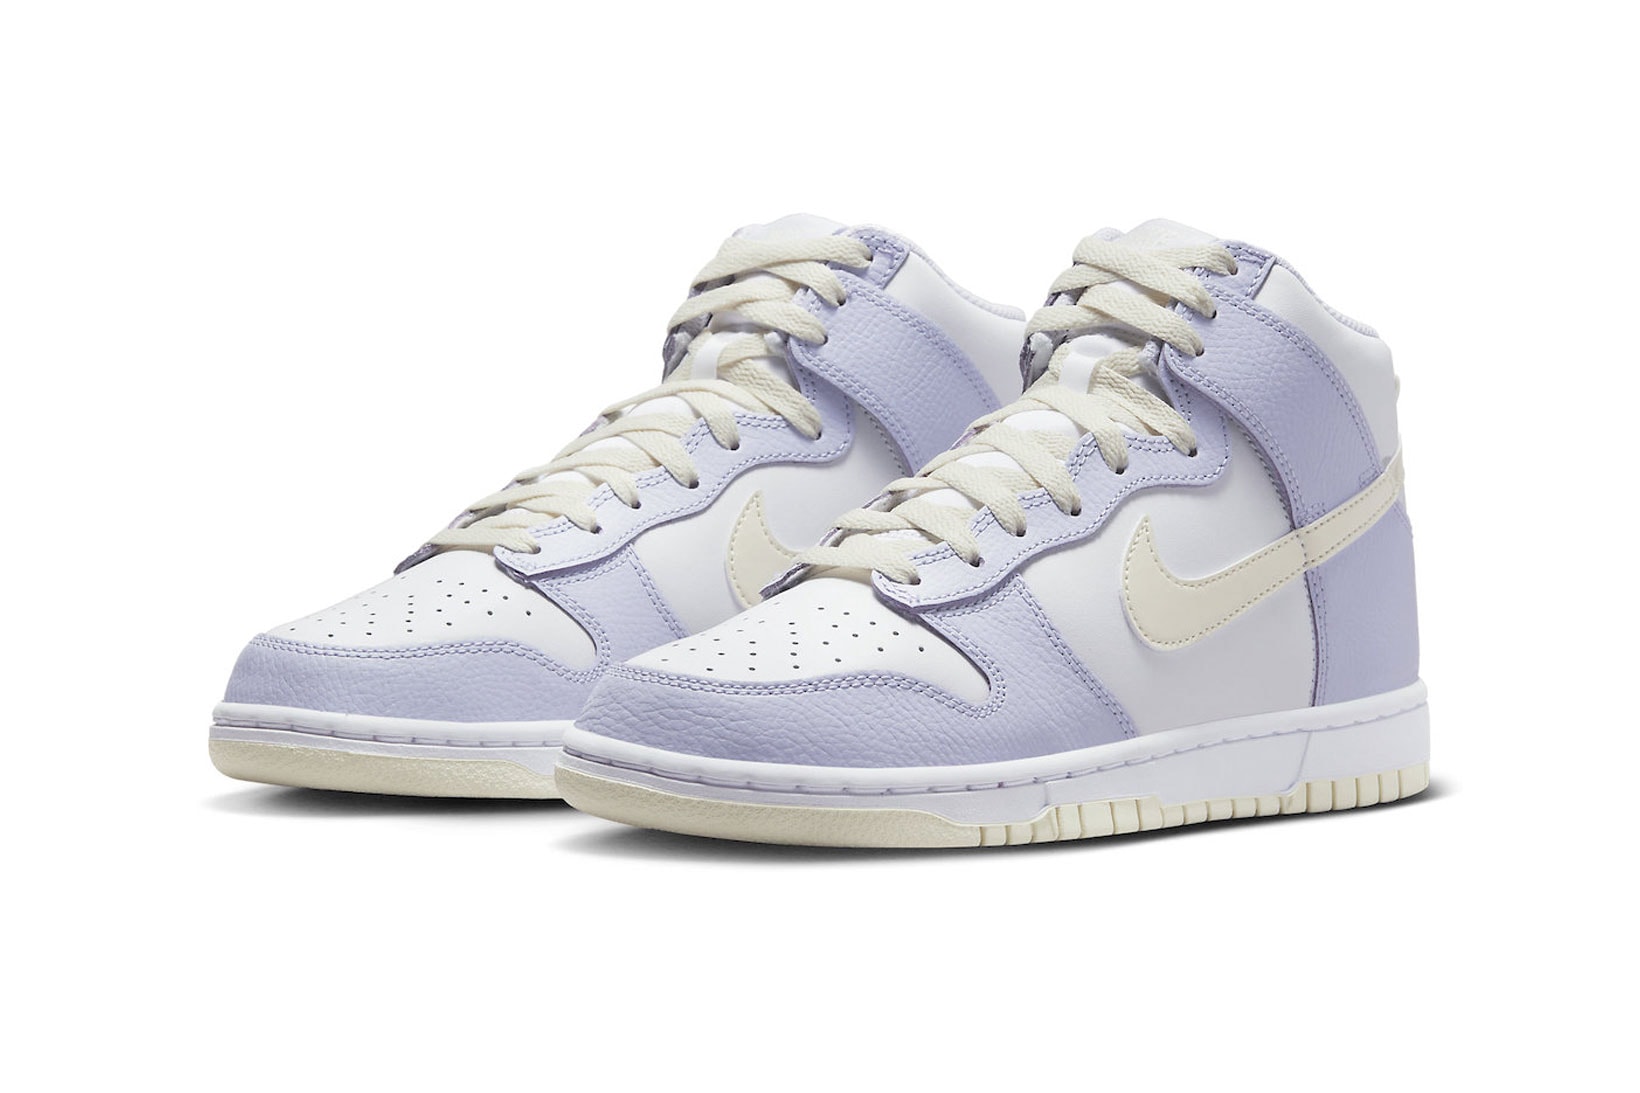 Nike Dunk High Oxygen Purple Womens Exclusive Coconut Milk Release Images